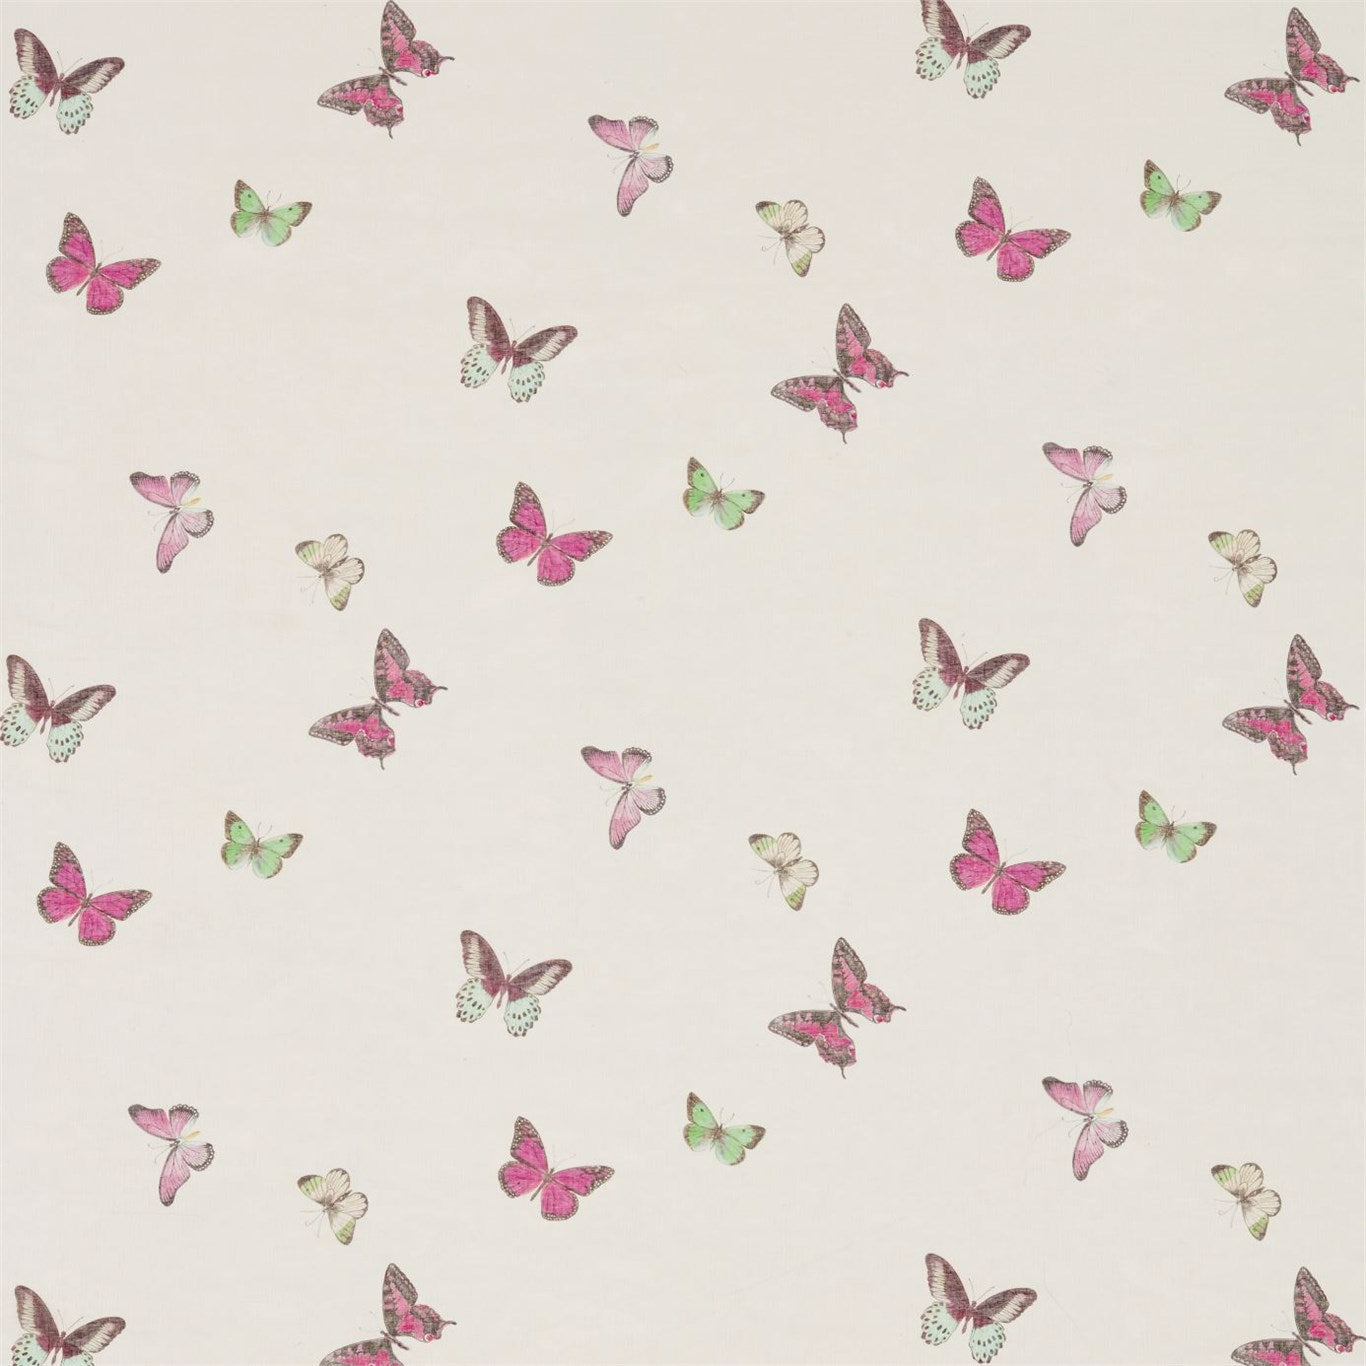 Butterfly Voile Fabric by Sanderson - DWOW225512 - Fuchsia/Cream